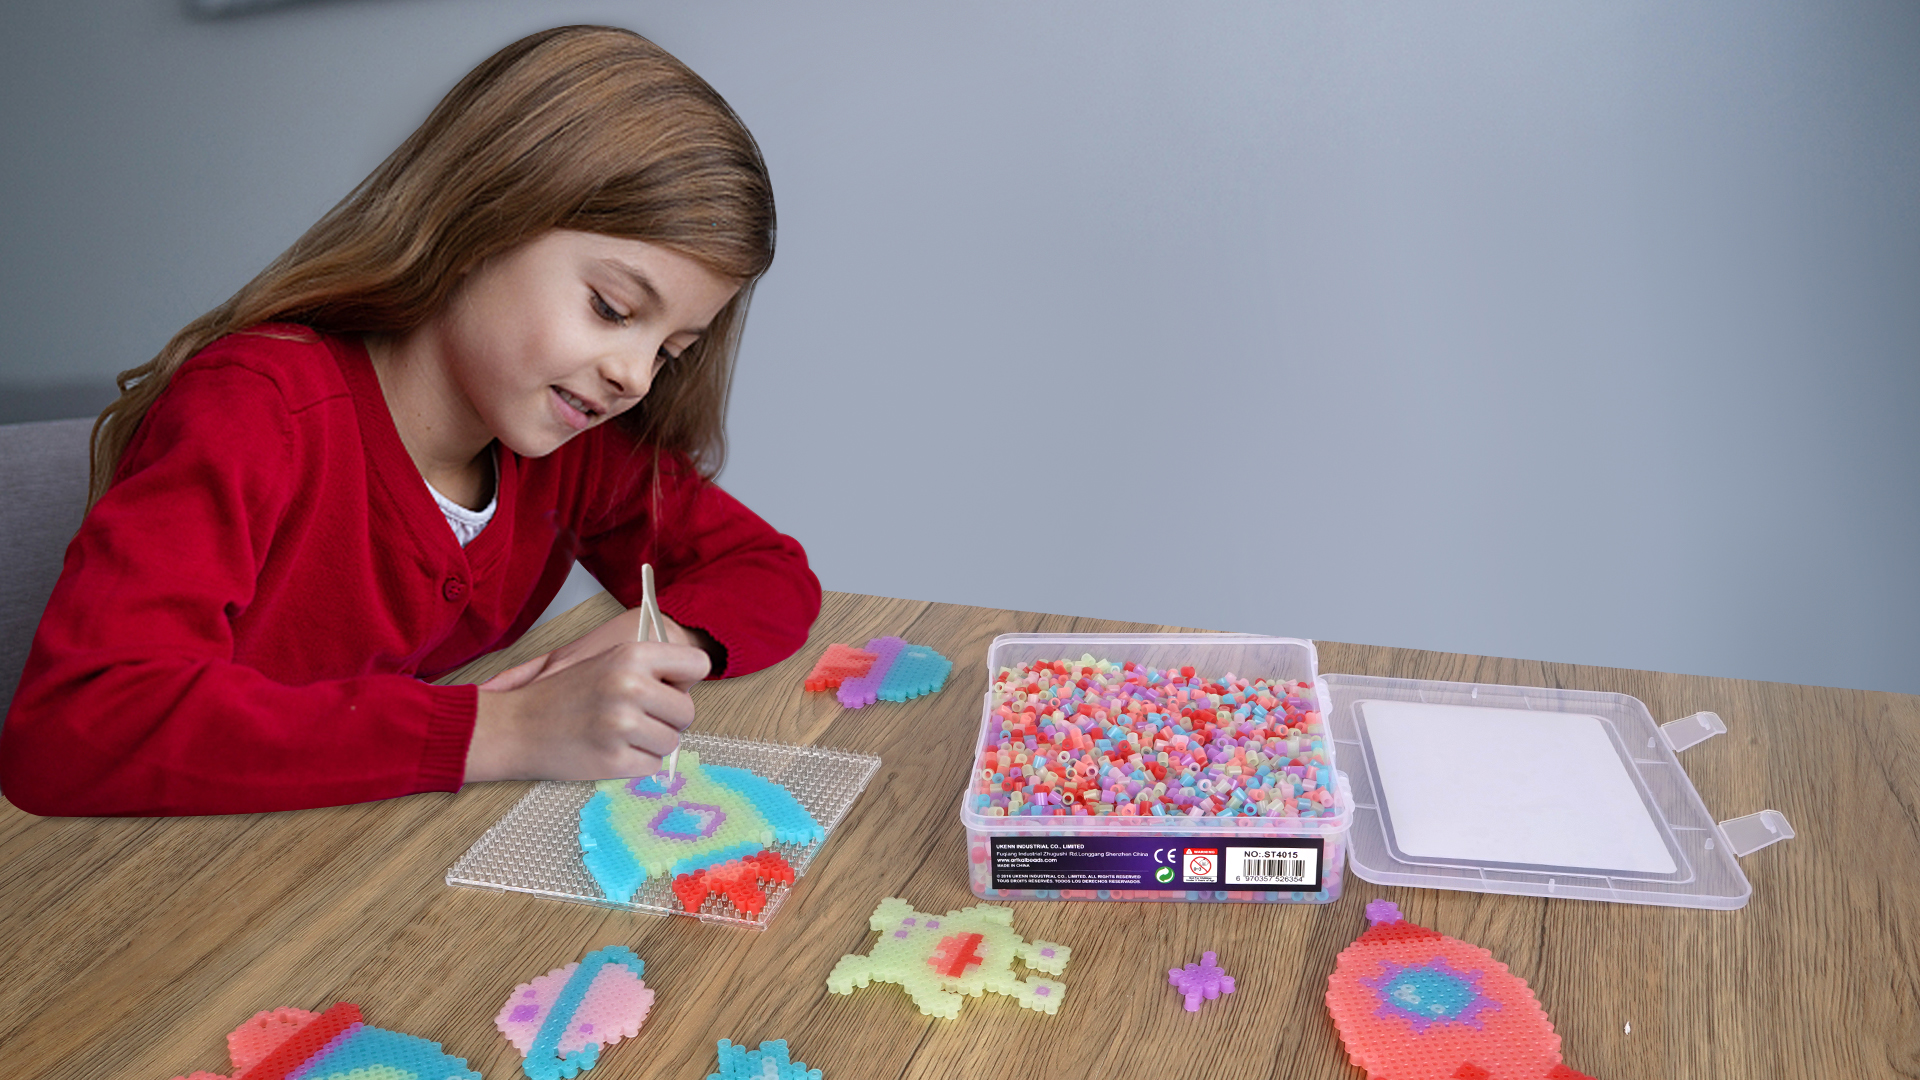 What are the uses of Fuse Beads in kids crafts?